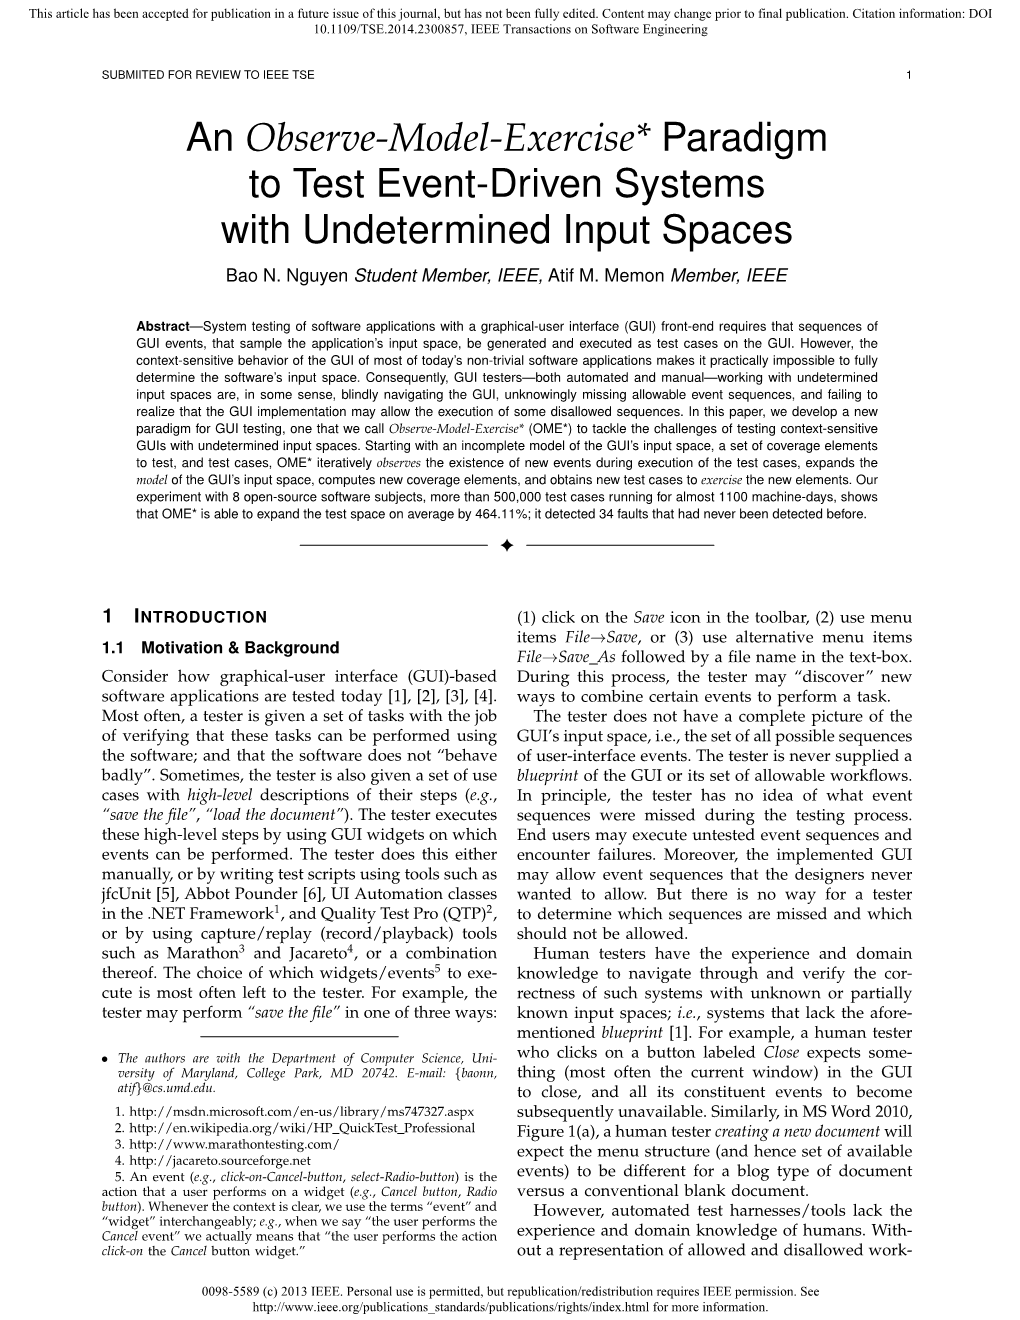 An Observe-Model-Exercise* Paradigm to Test Event-Driven Systems with Undetermined Input Spaces Bao N